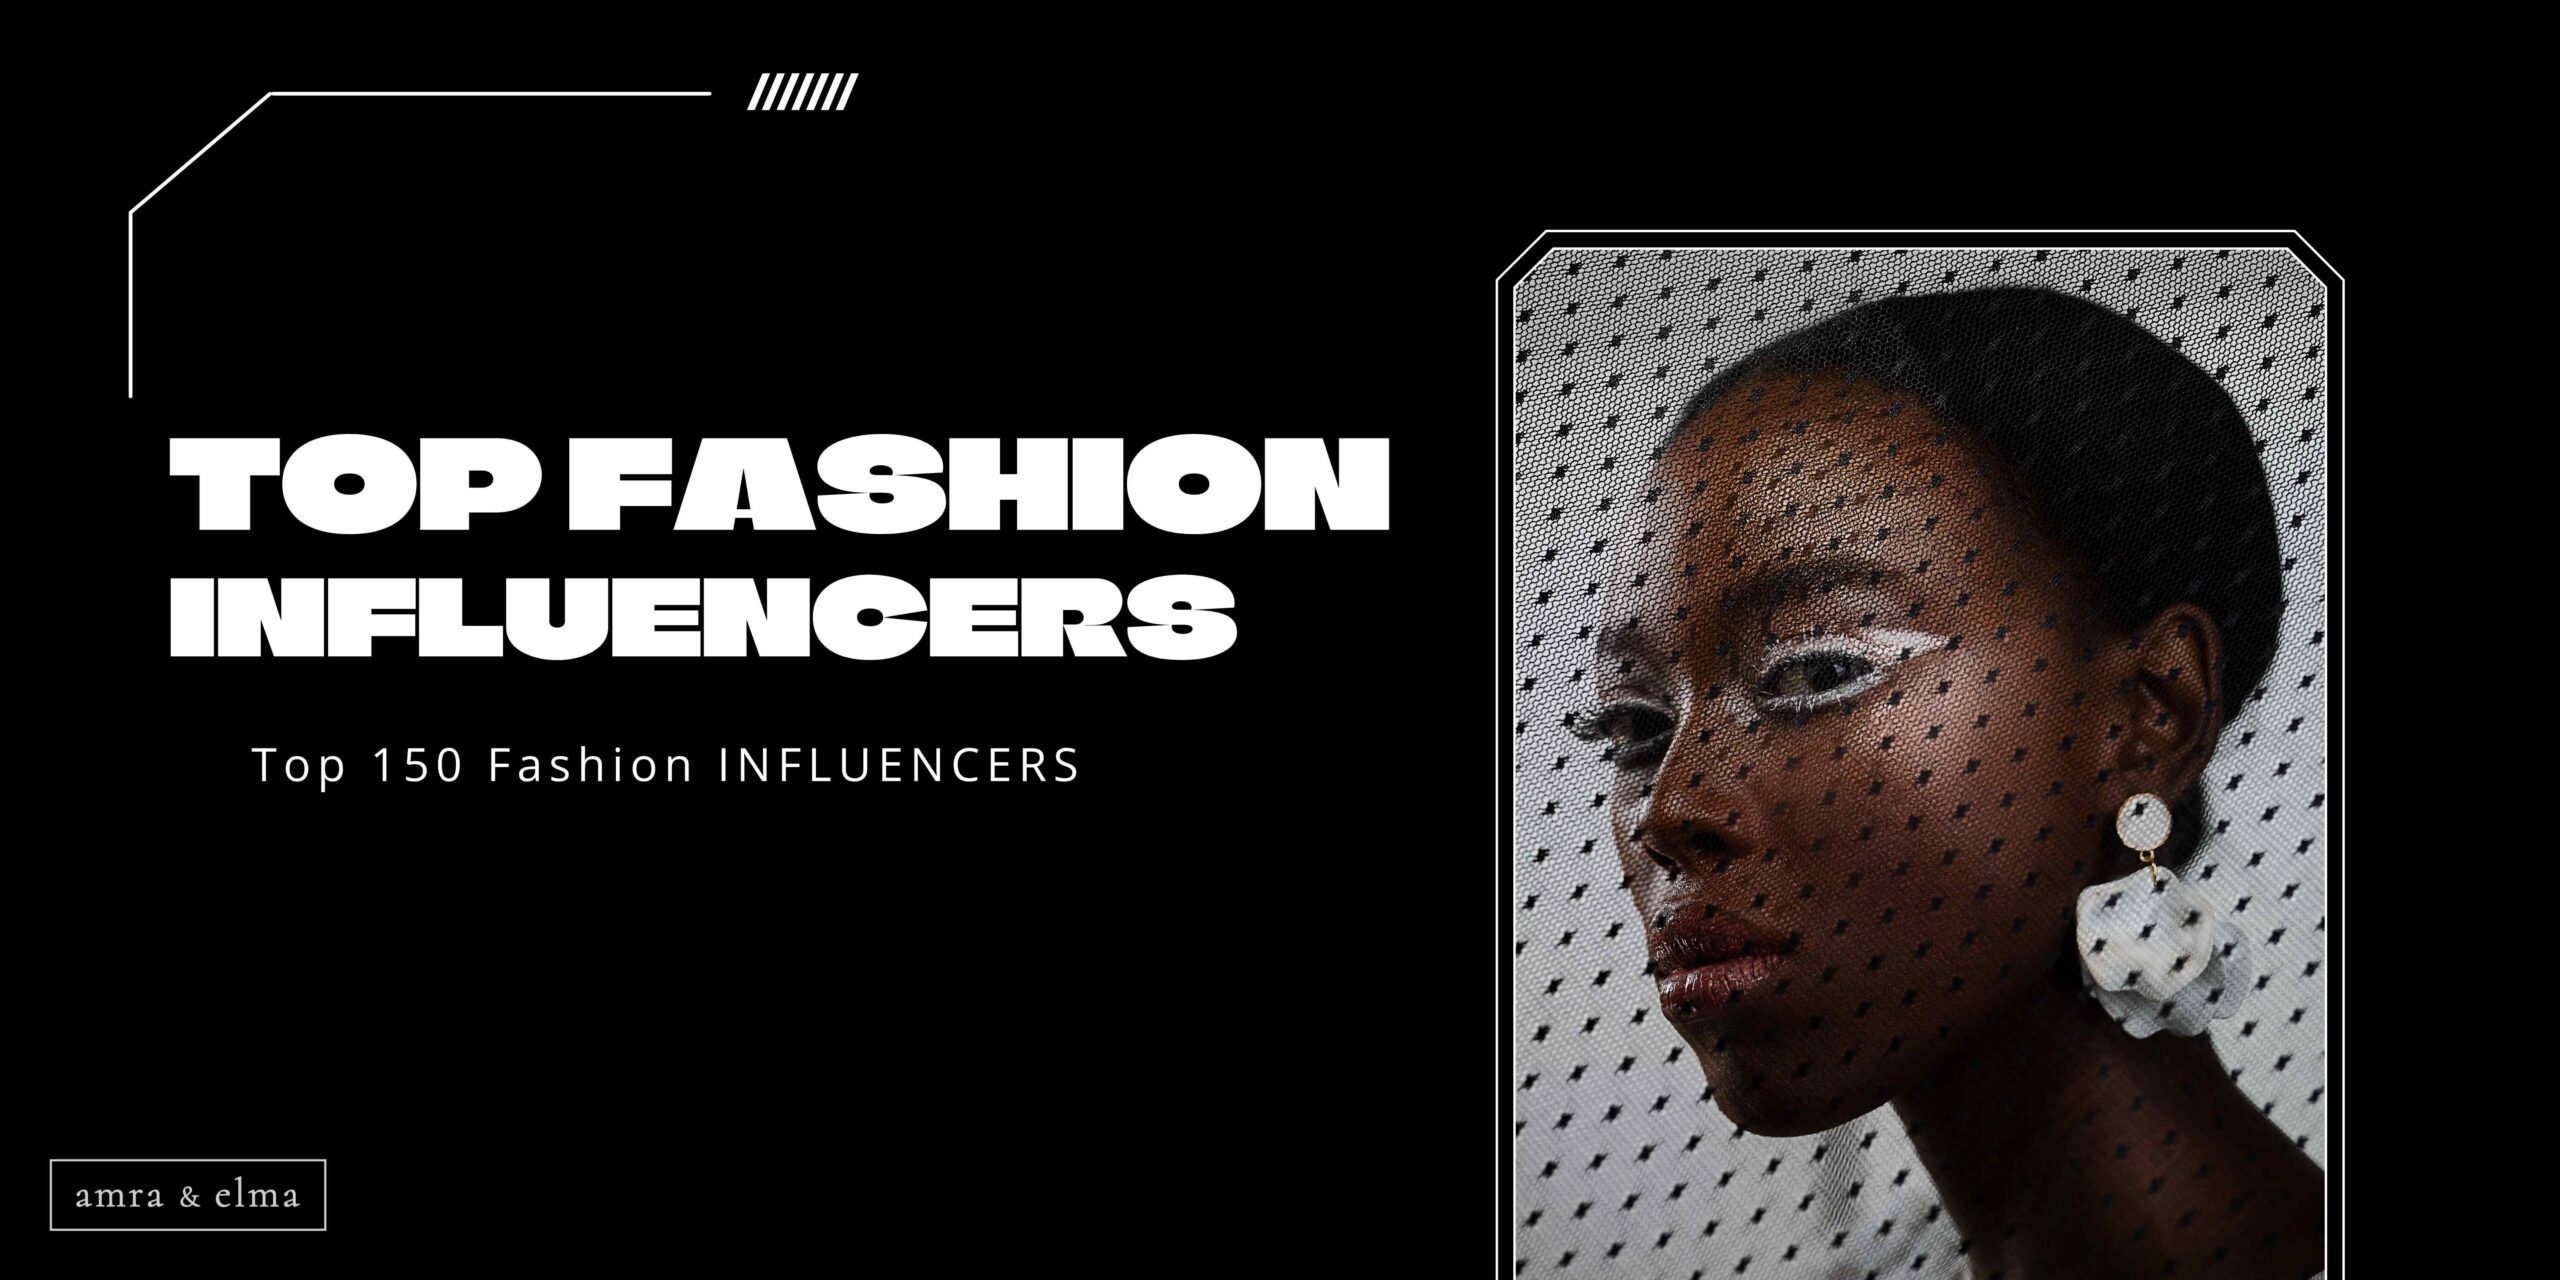 Meet Africa's most influential fashionistas: The top fashion influencers  leading the way!